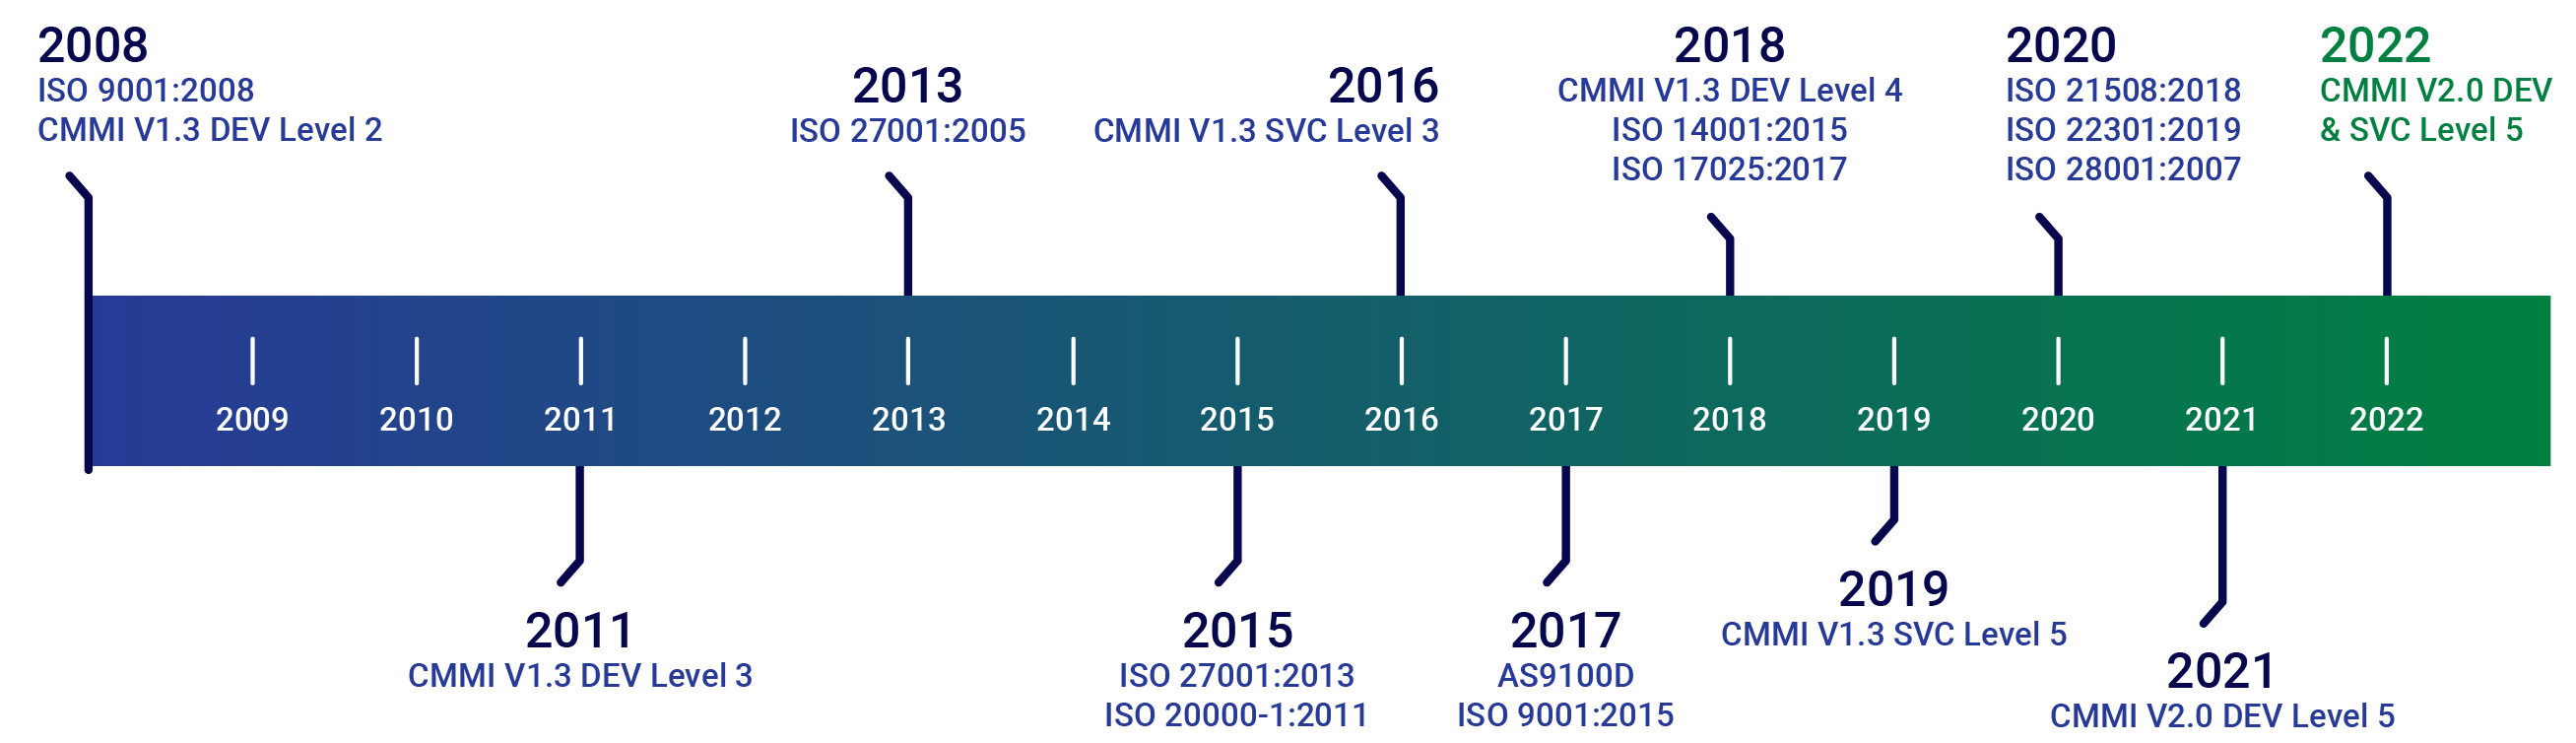 quality certification timeline 2008-2022